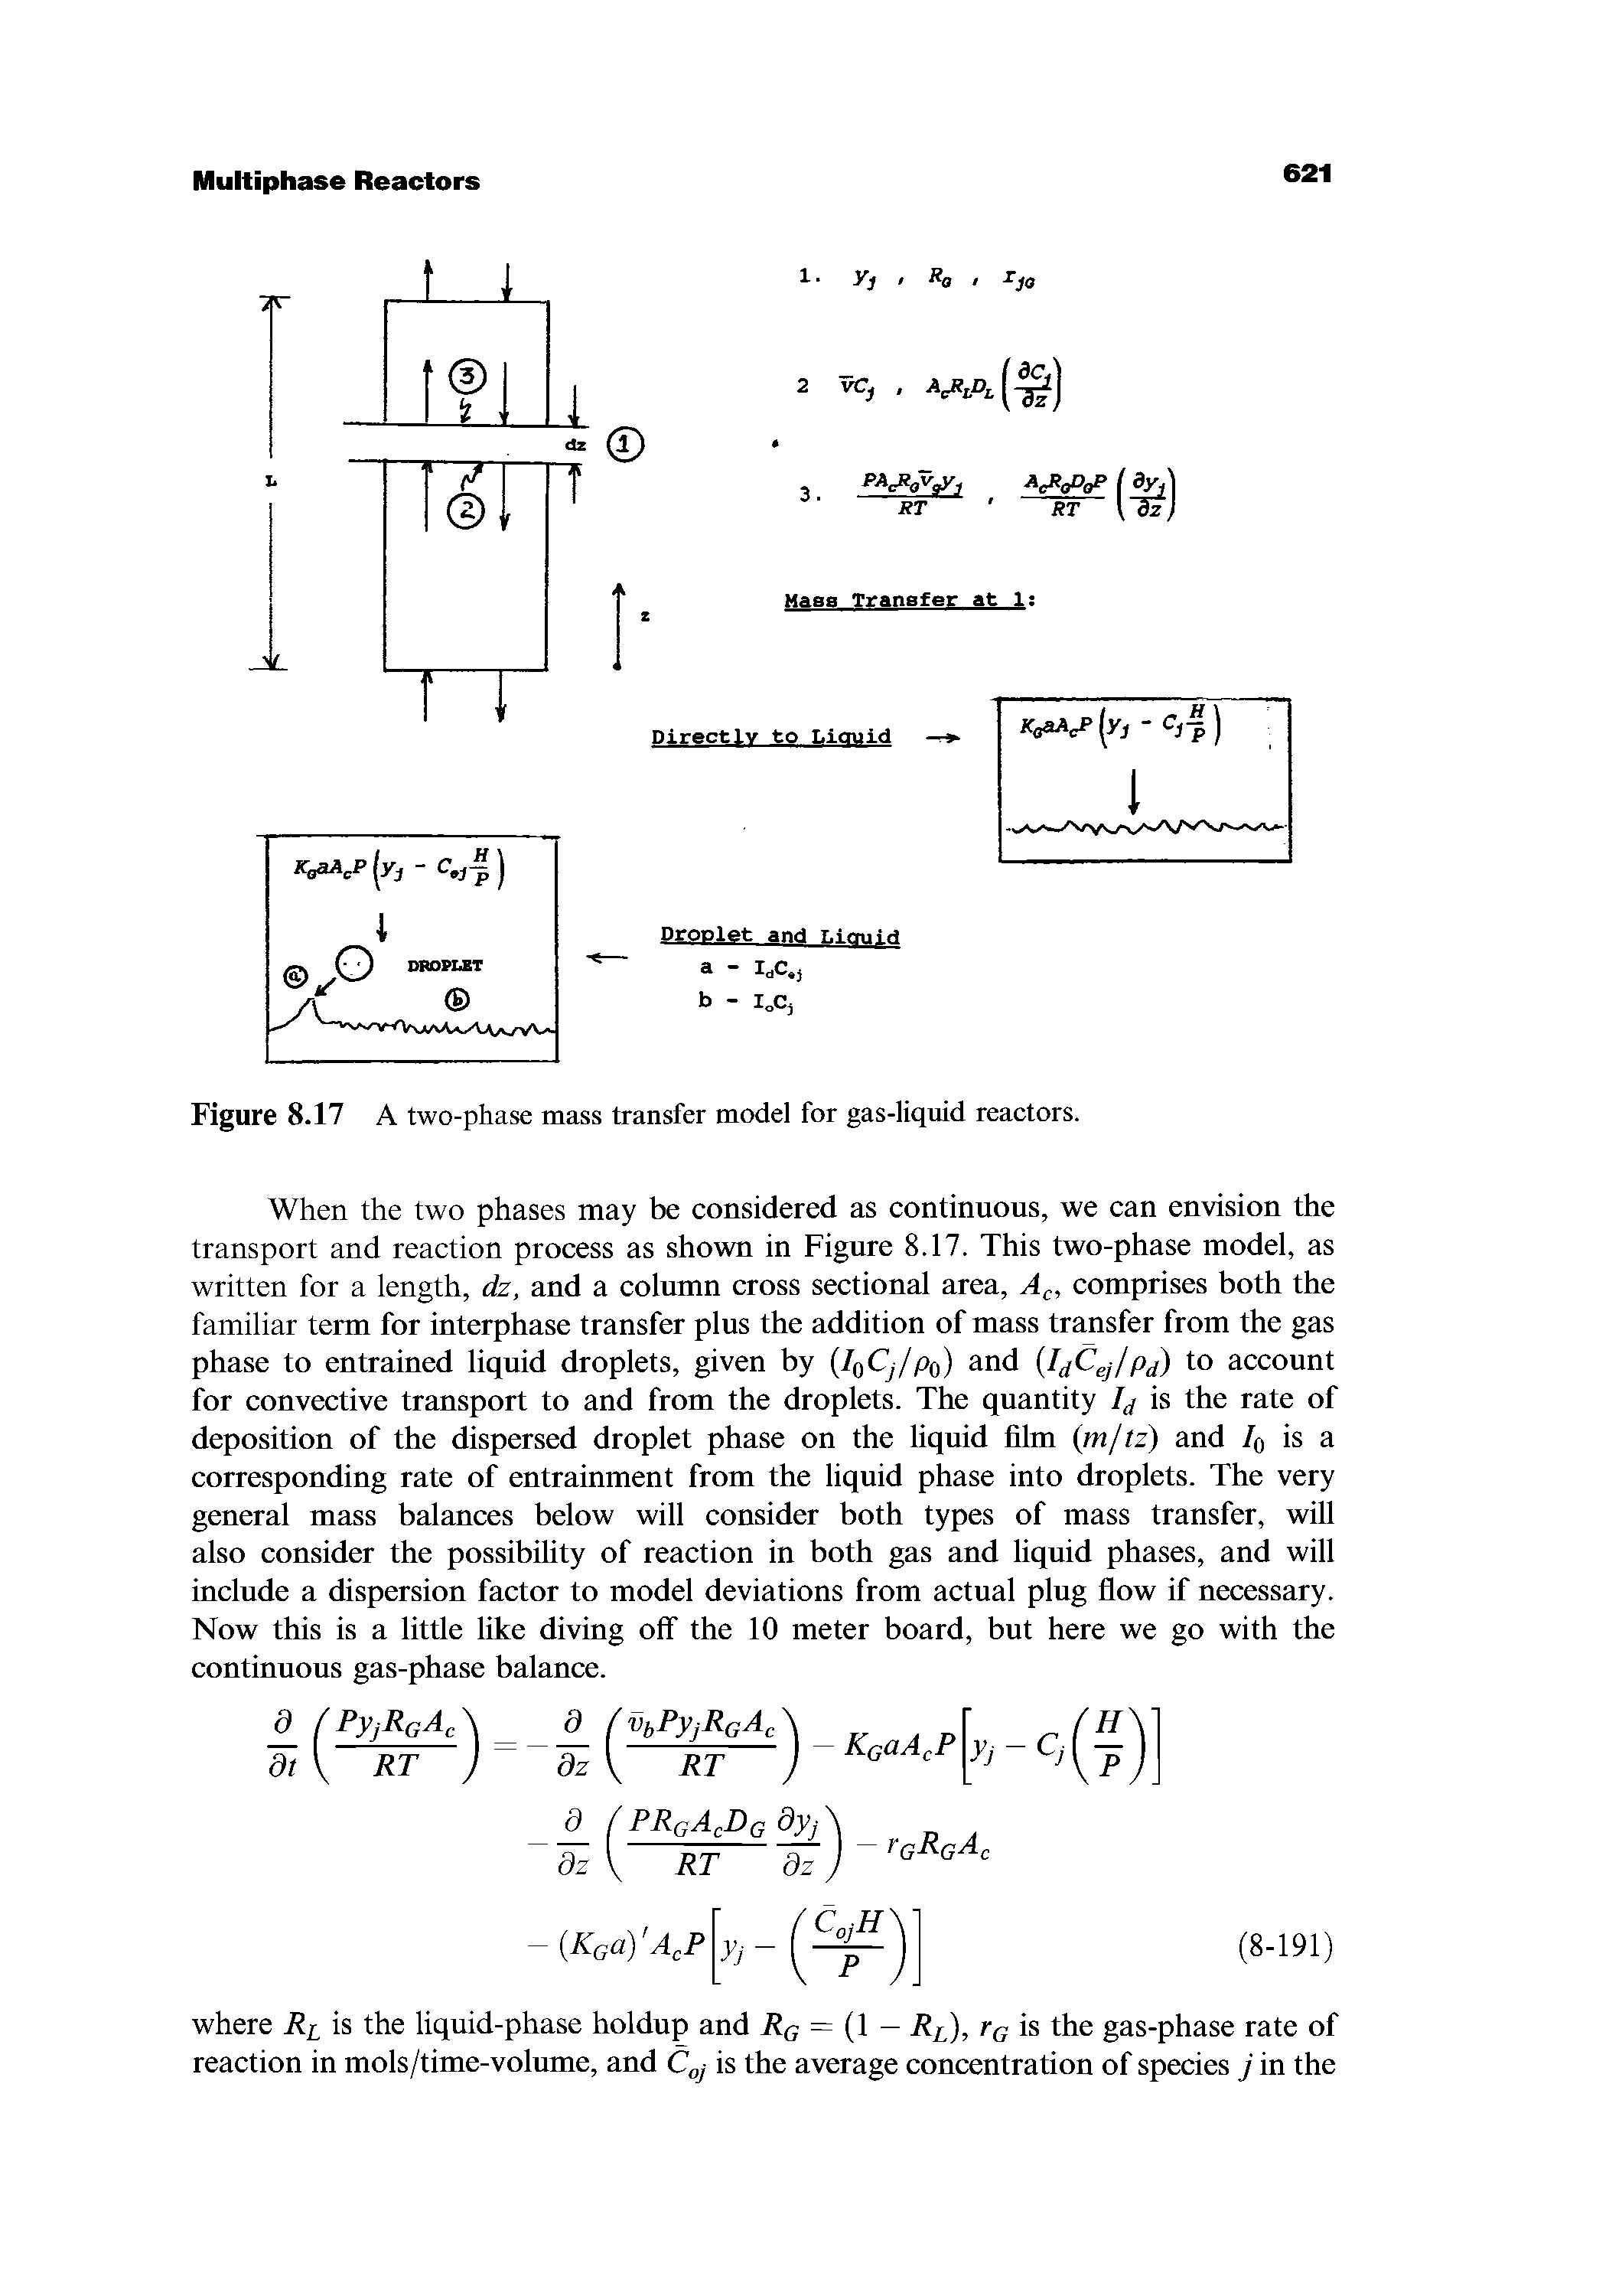 Figure 8.17 A two-phase mass transfer model for gas-liquid reactors.